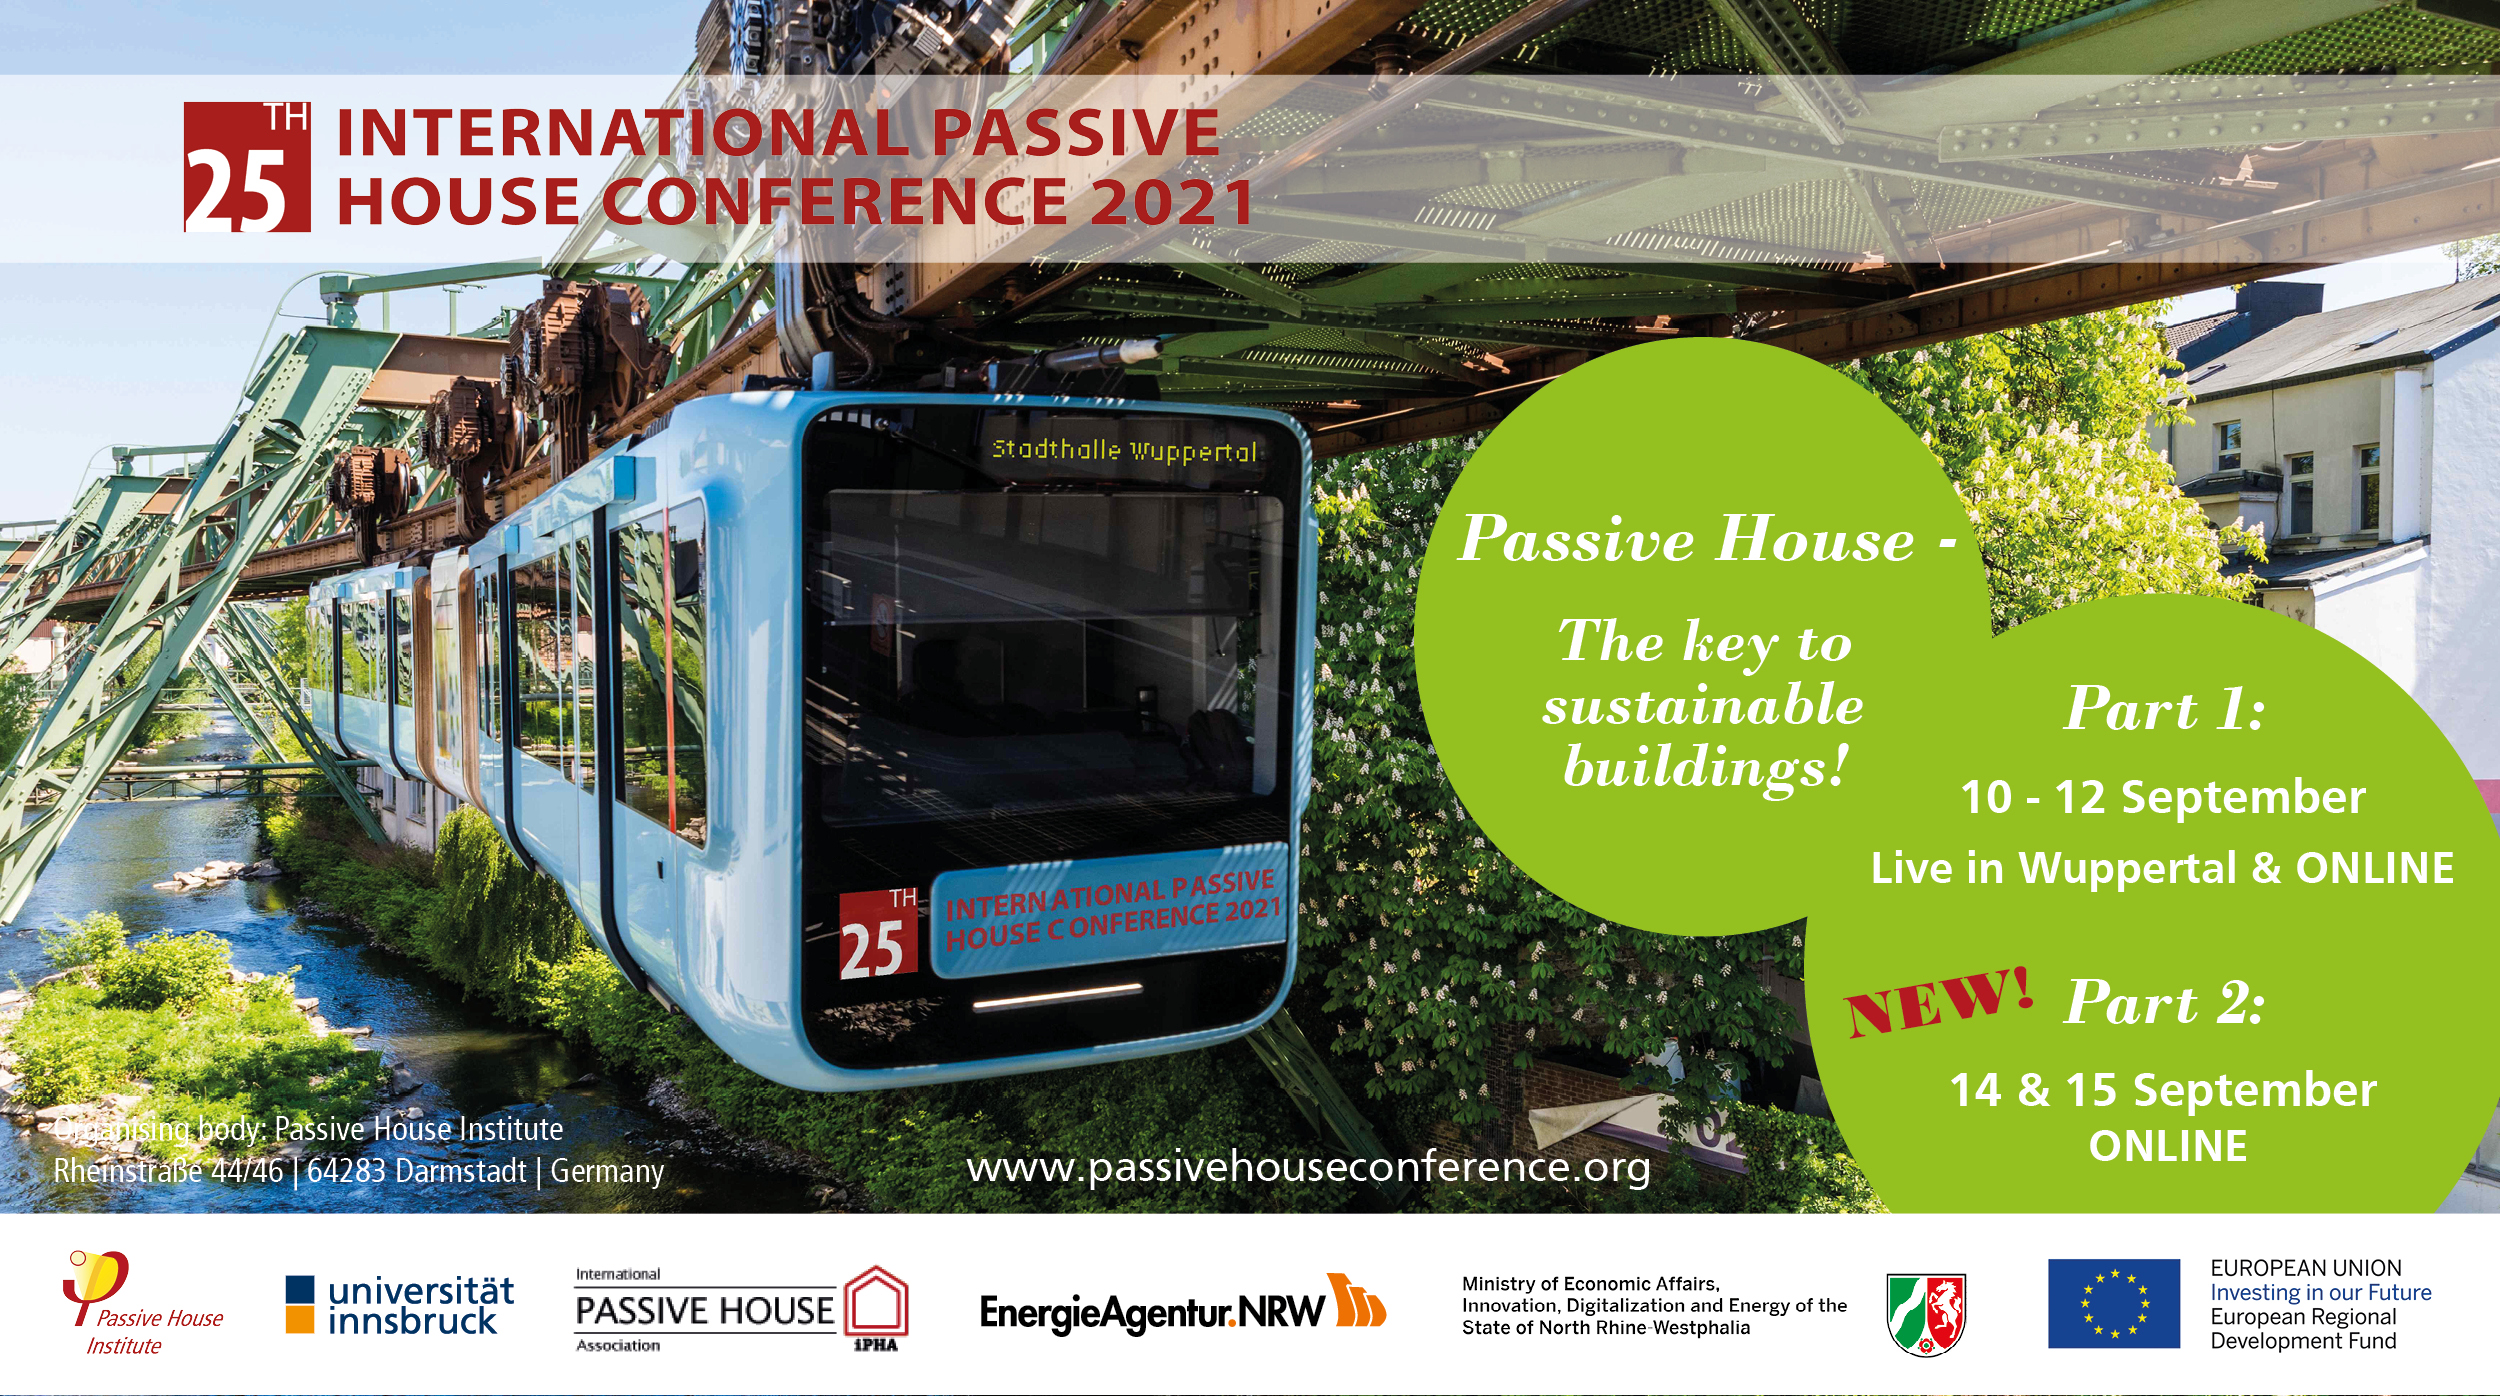 The 25th International Passive House Conference Starts September 10